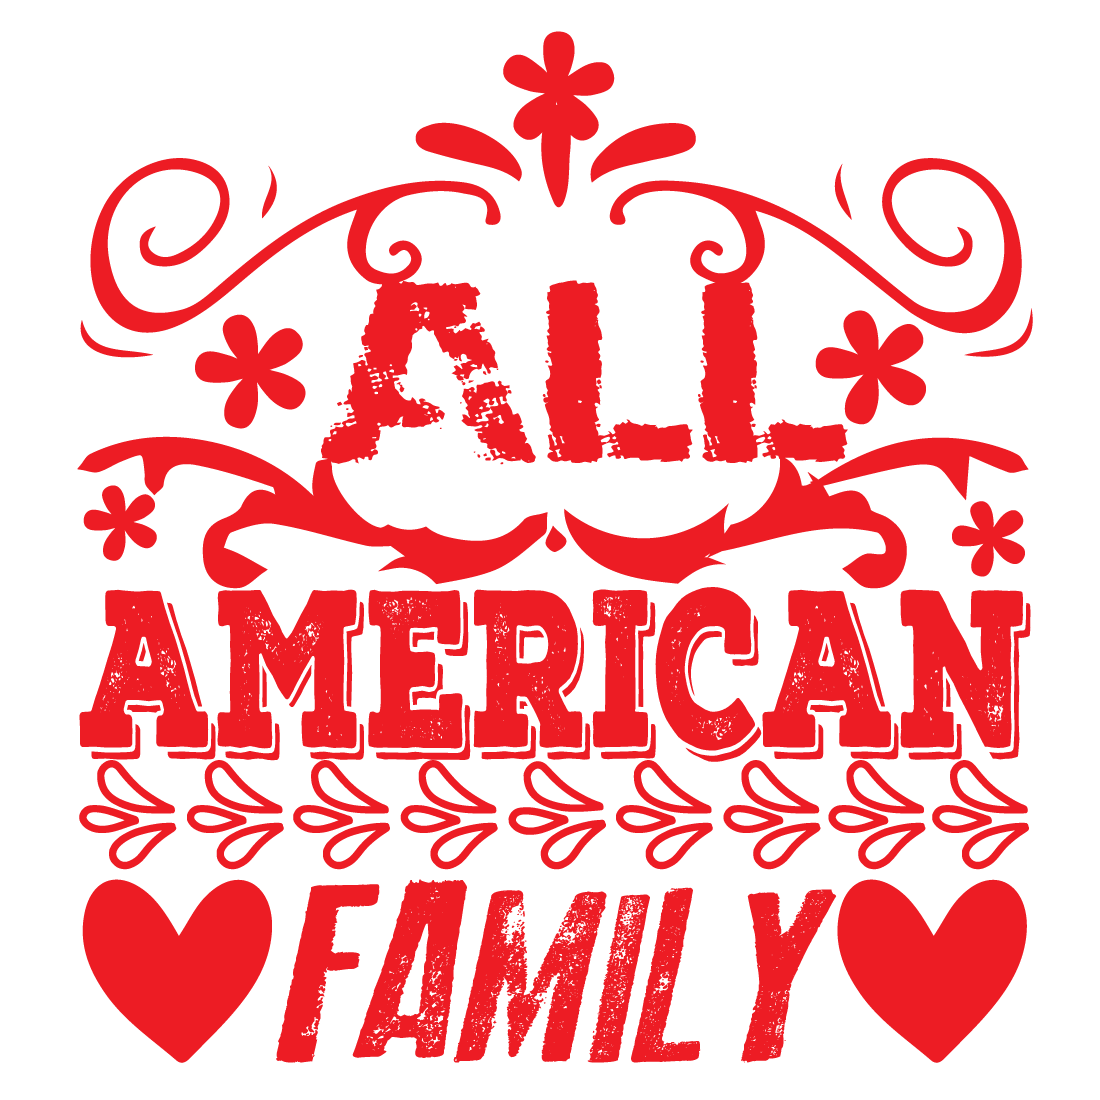 All American family preview image.